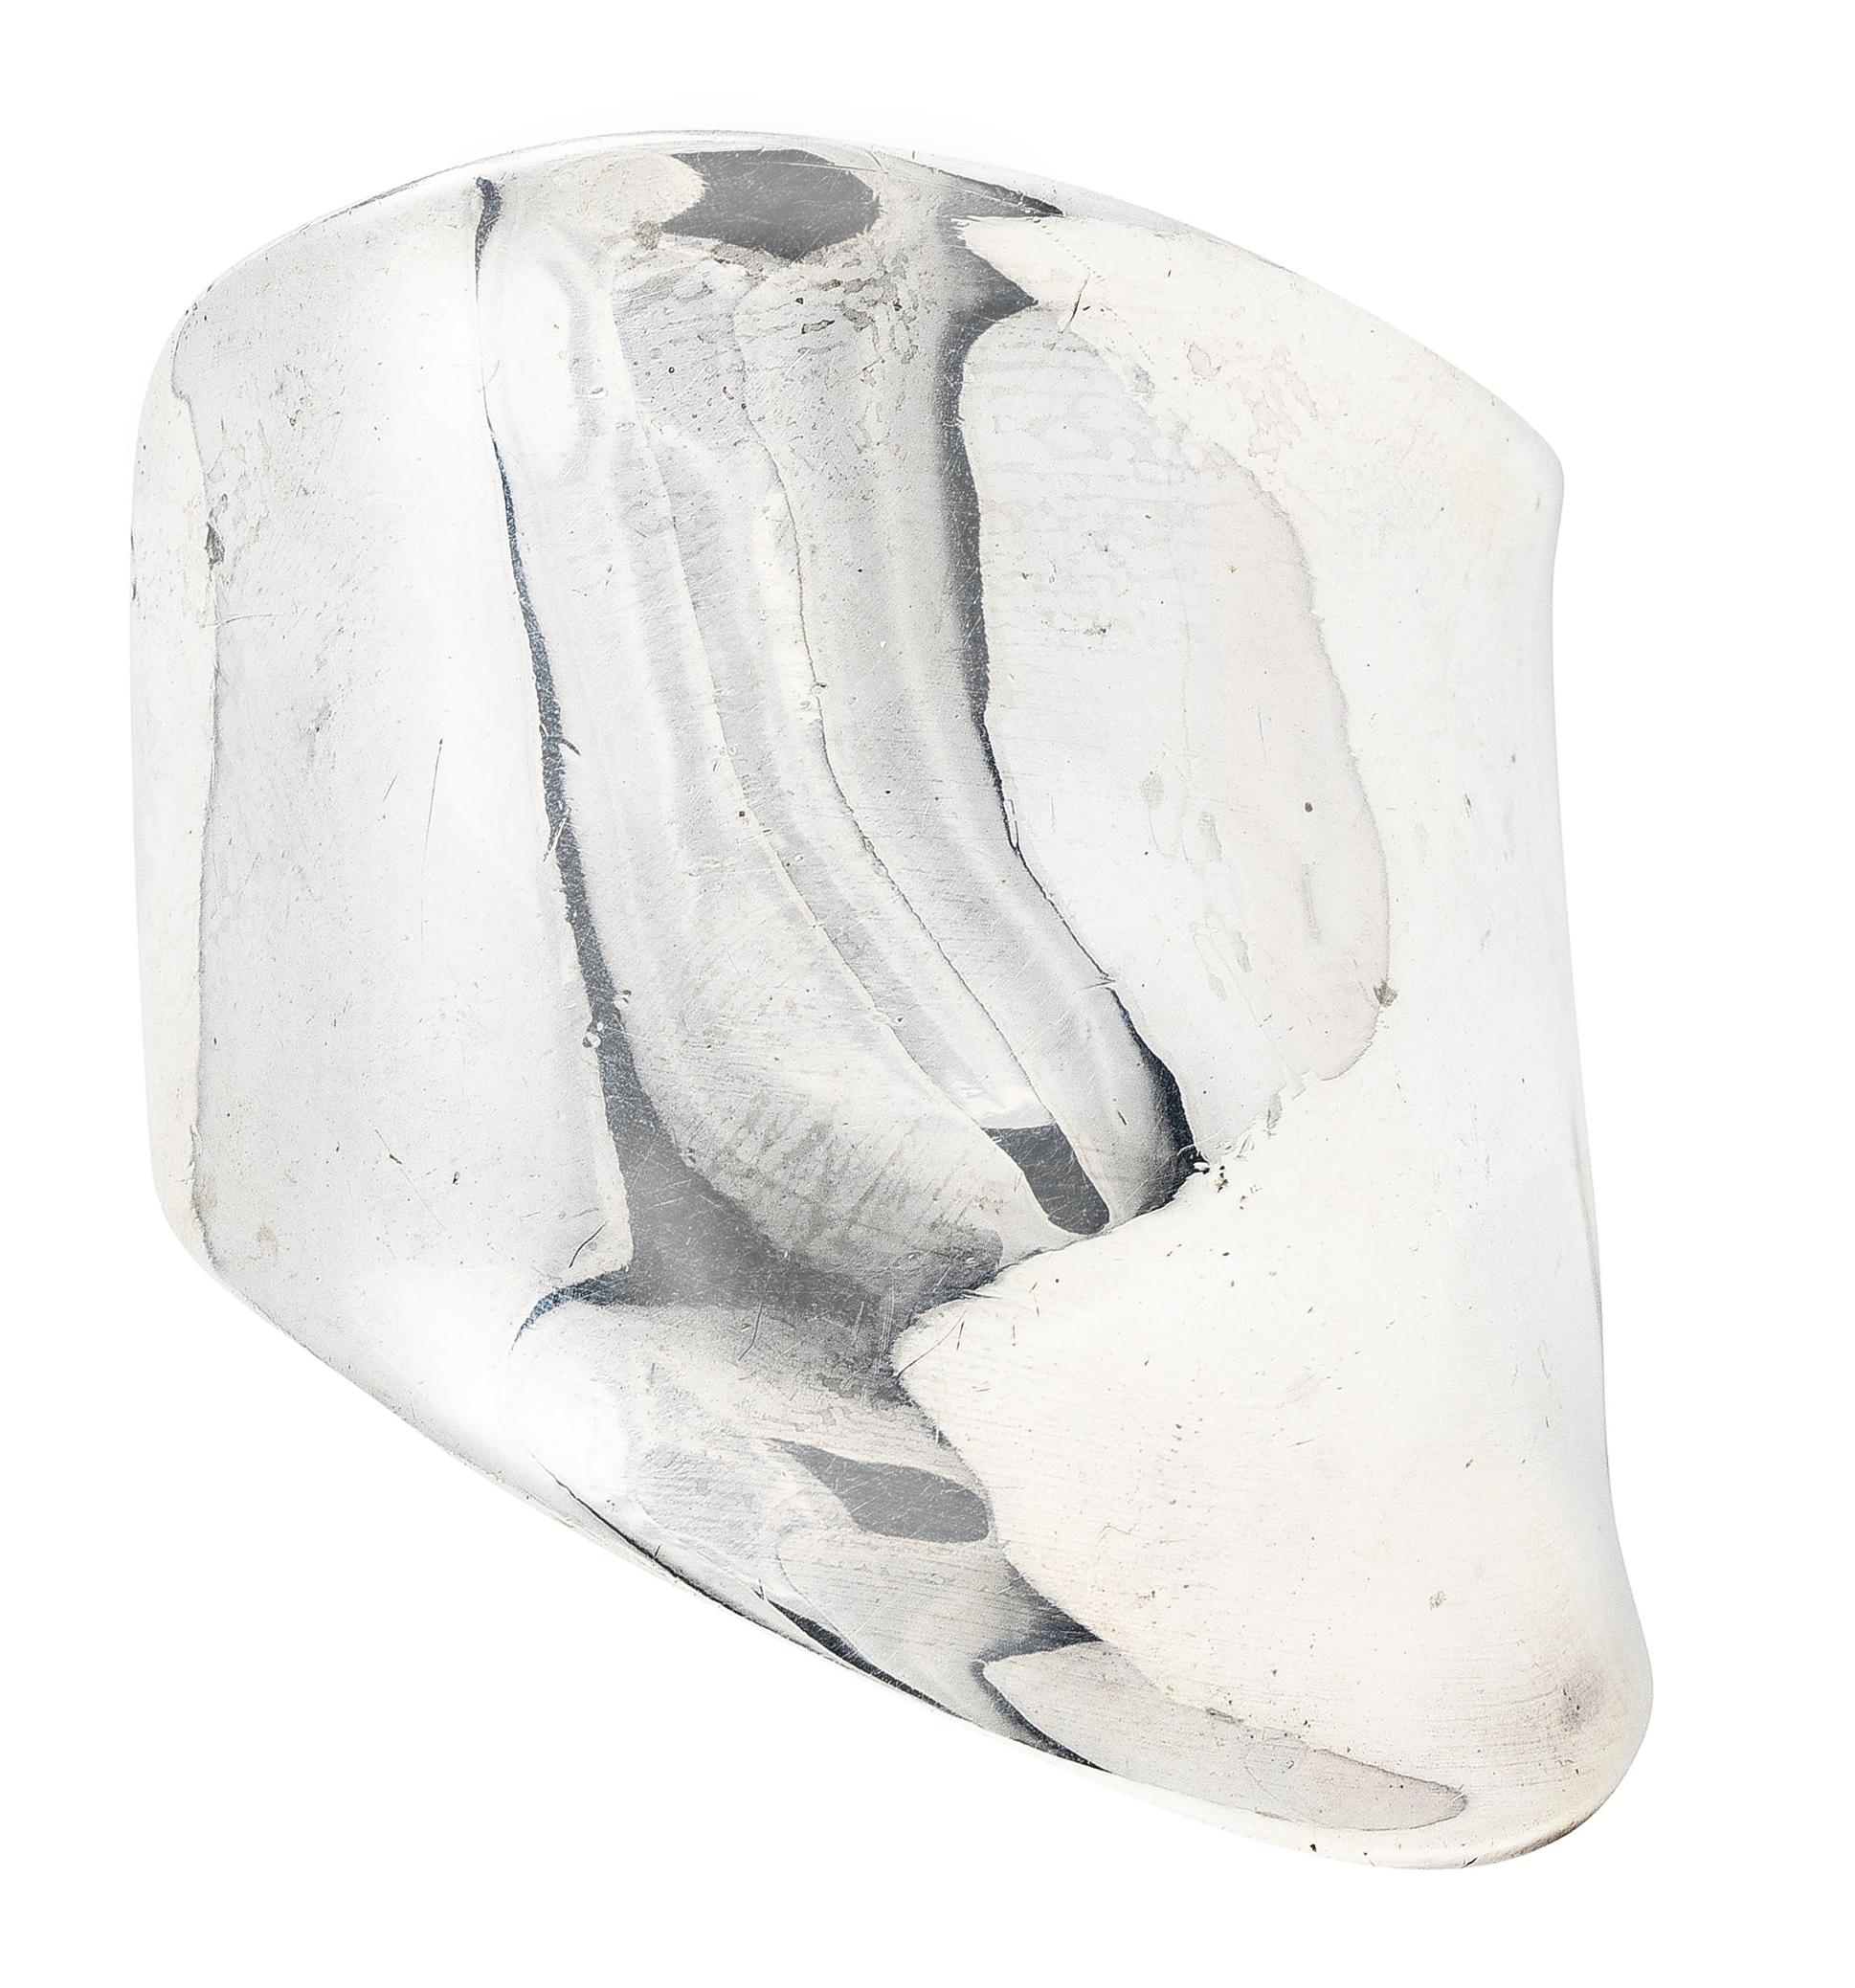 Cuff bracelet is designed as a flowing organic wrist contour. Featuring raised wrist bone motif and subtle fluted edges. With high polished finish. Stamped sterling for sterling silver. Fully signed Peretti Tiffany & Co. for Elsa Peretti Tiffany &